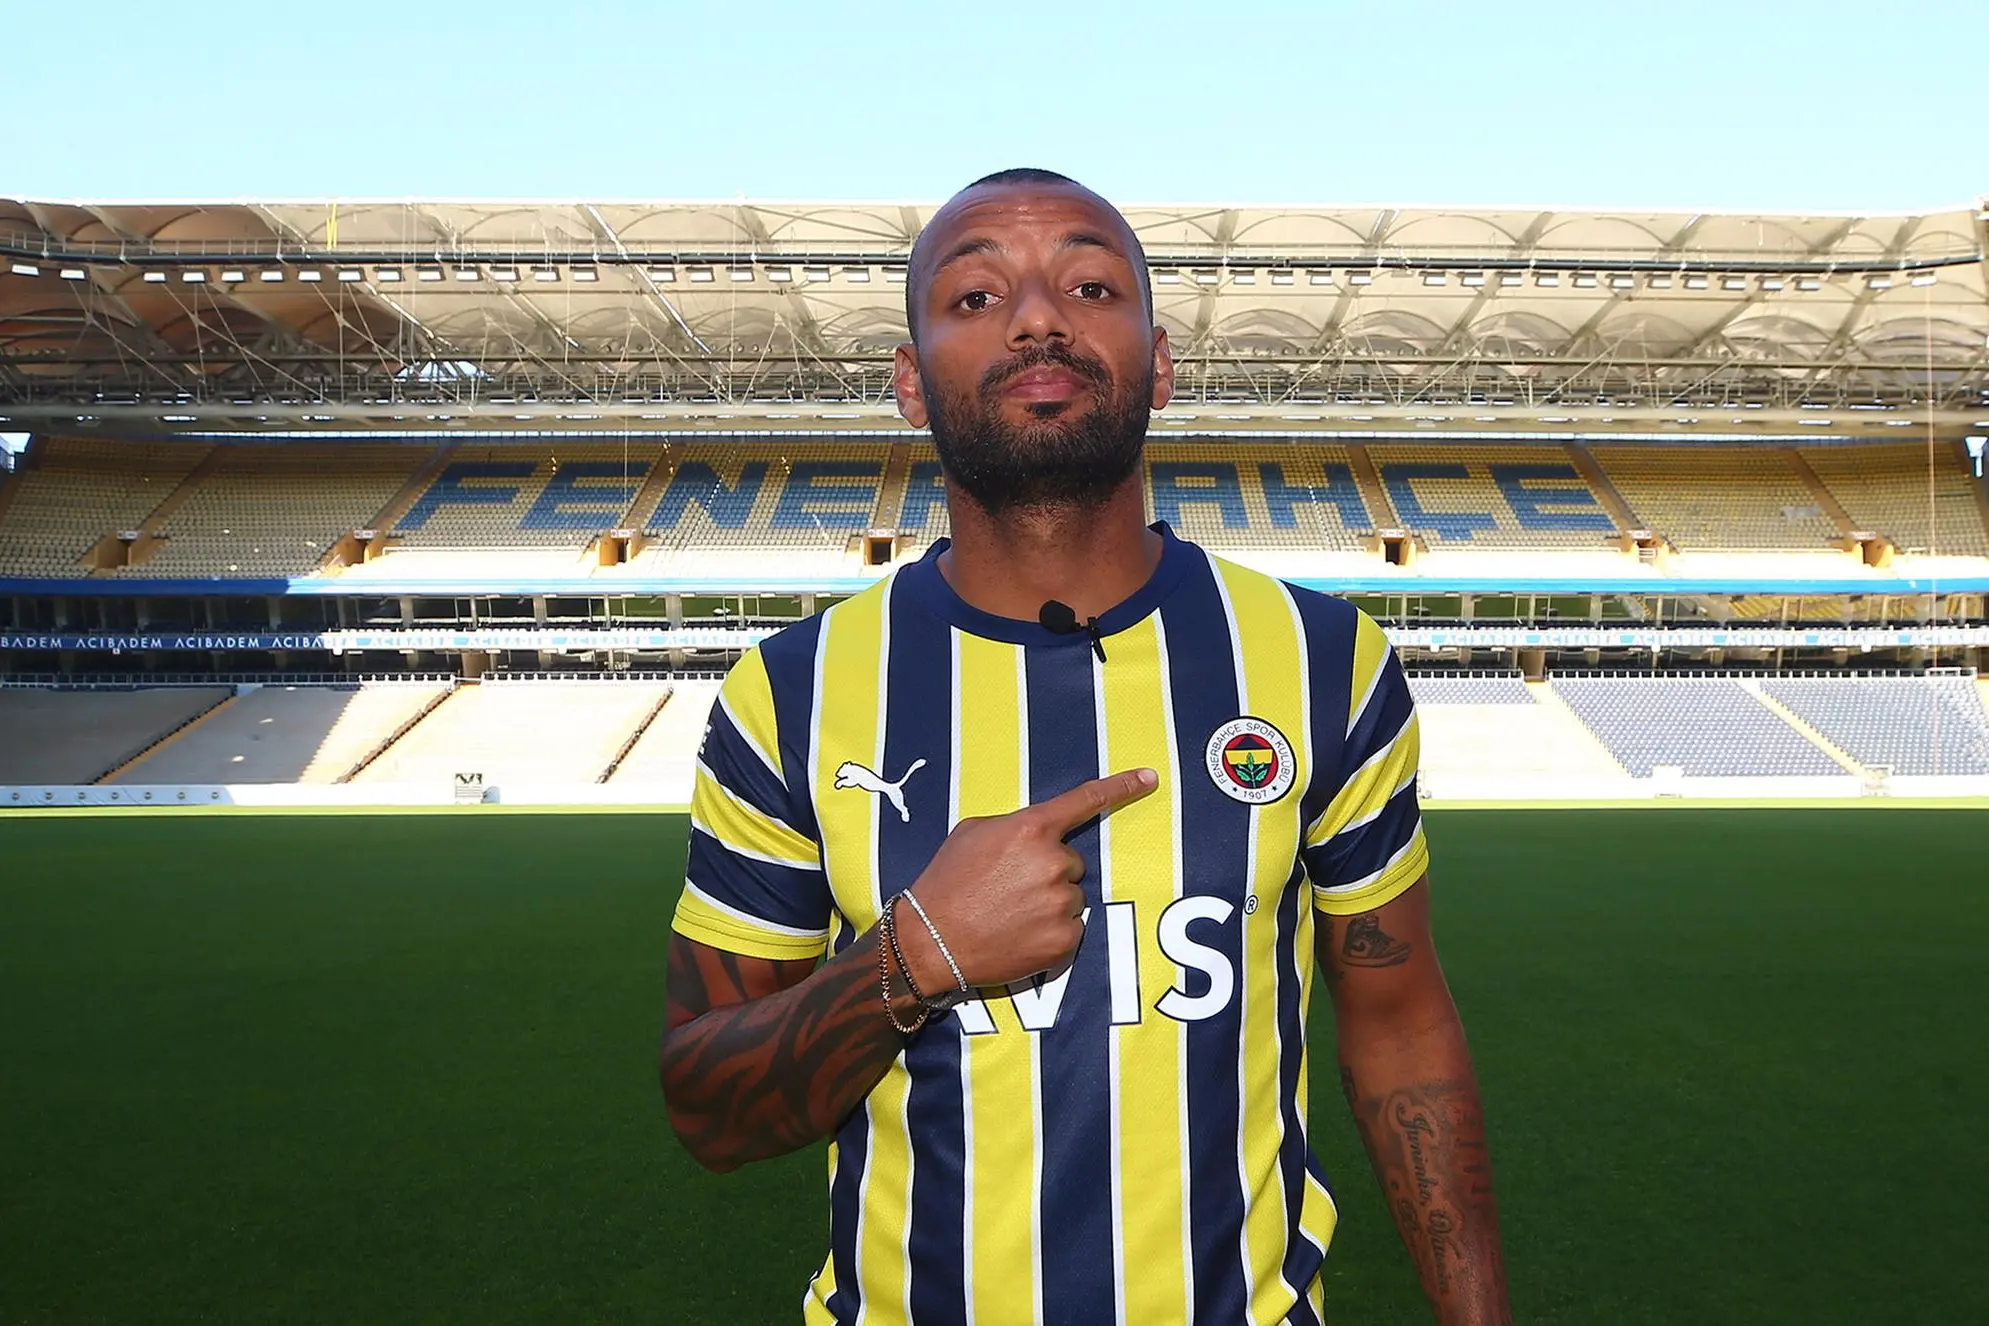 Joao Pedro with the new shirt (from the Fenerbahçe website)